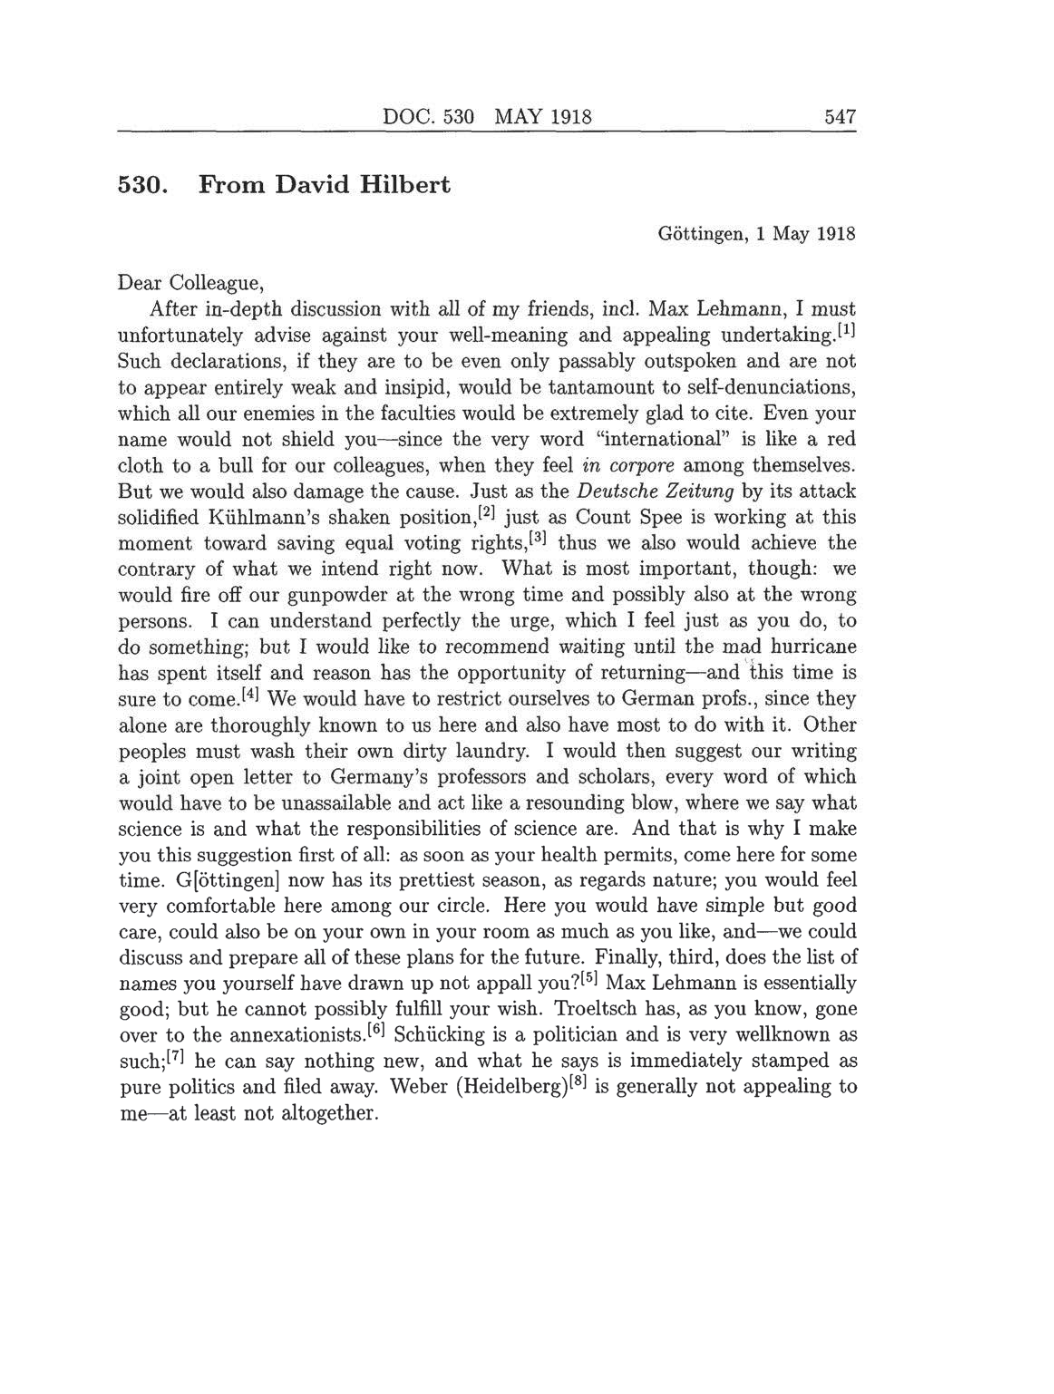 Volume 8: The Berlin Years: Correspondence, 1914-1918 (English translation supplement) page 547